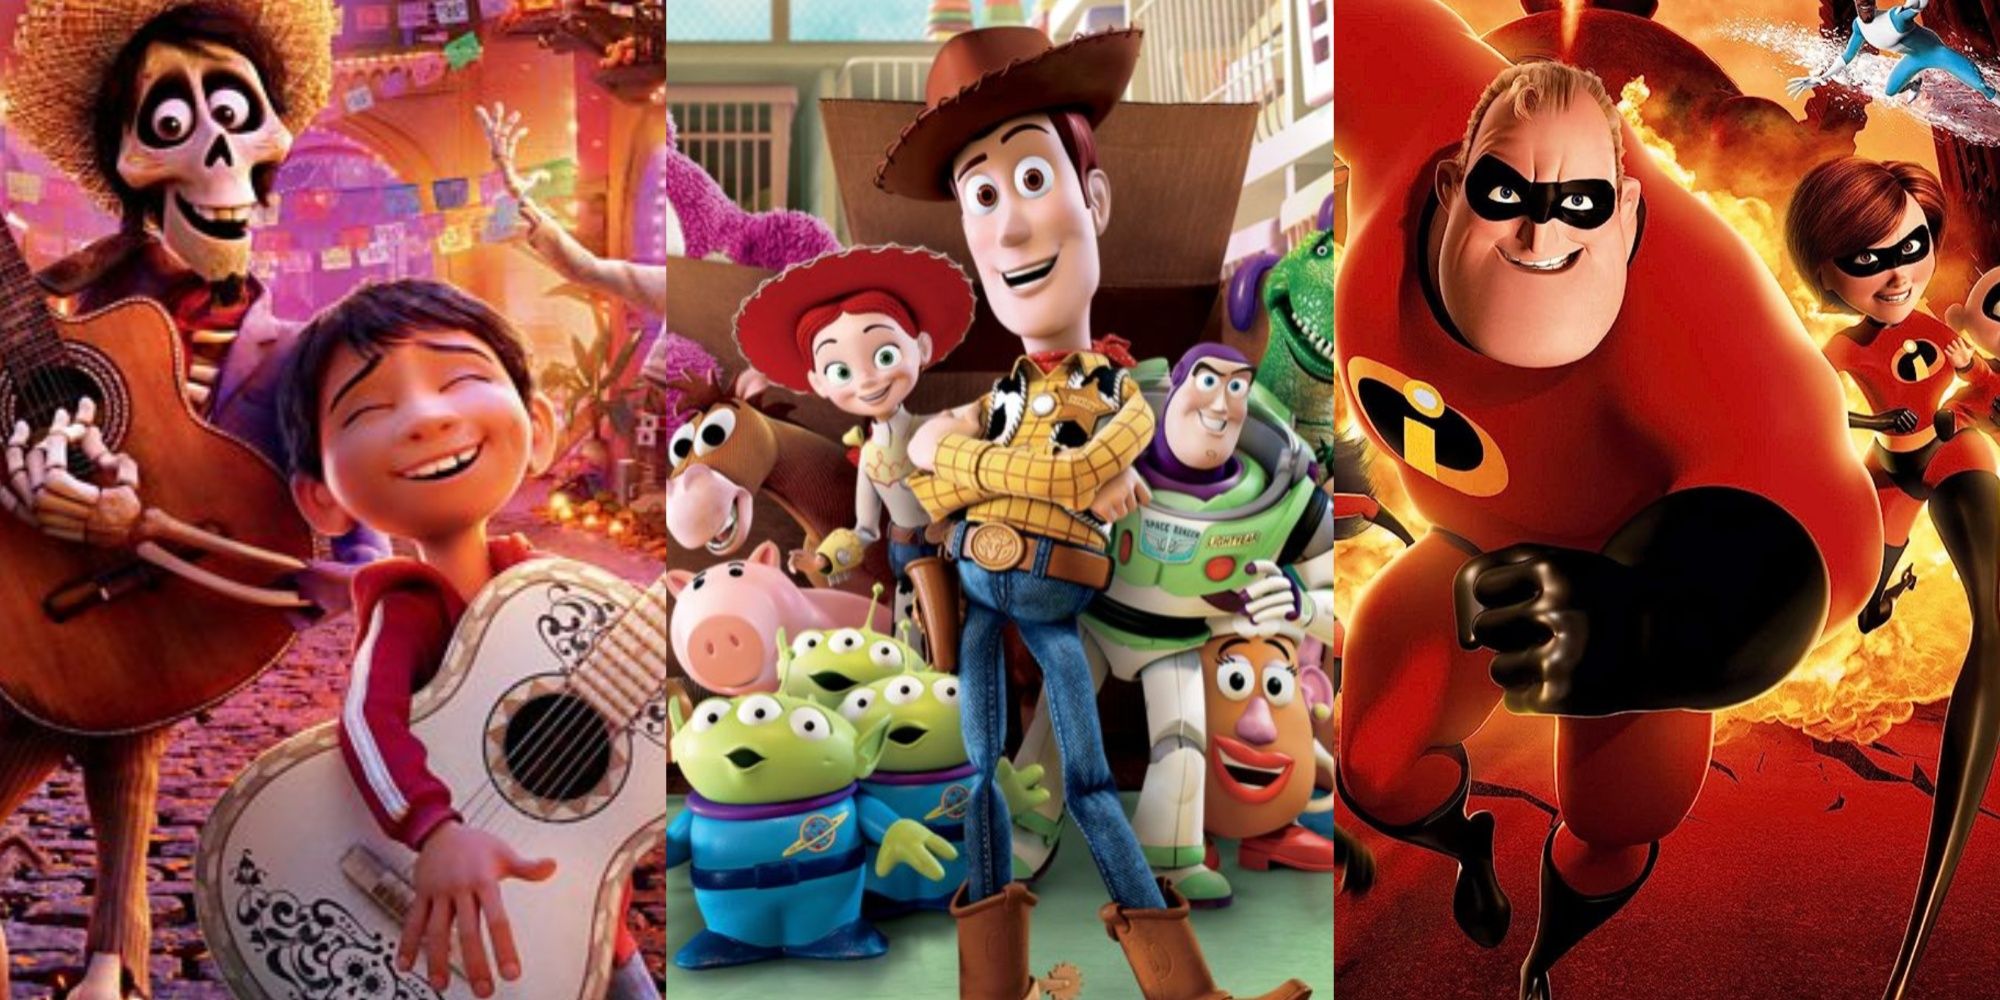 Split images of Coco, Toy Story 3, and The Incredibles